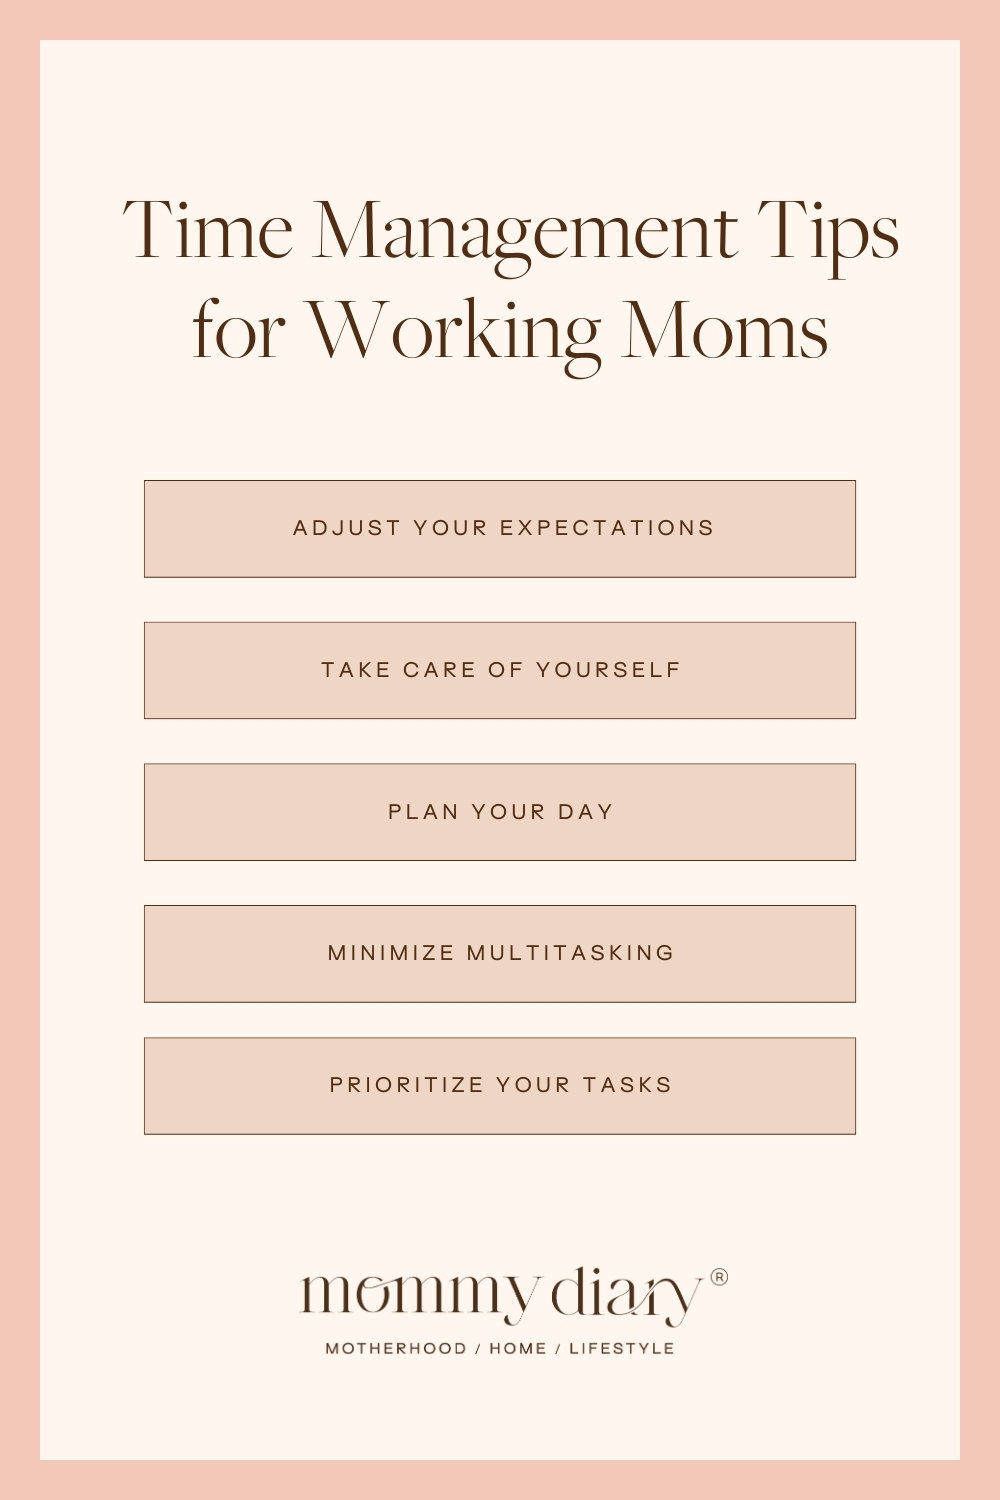 Time Management Tips for Working Moms